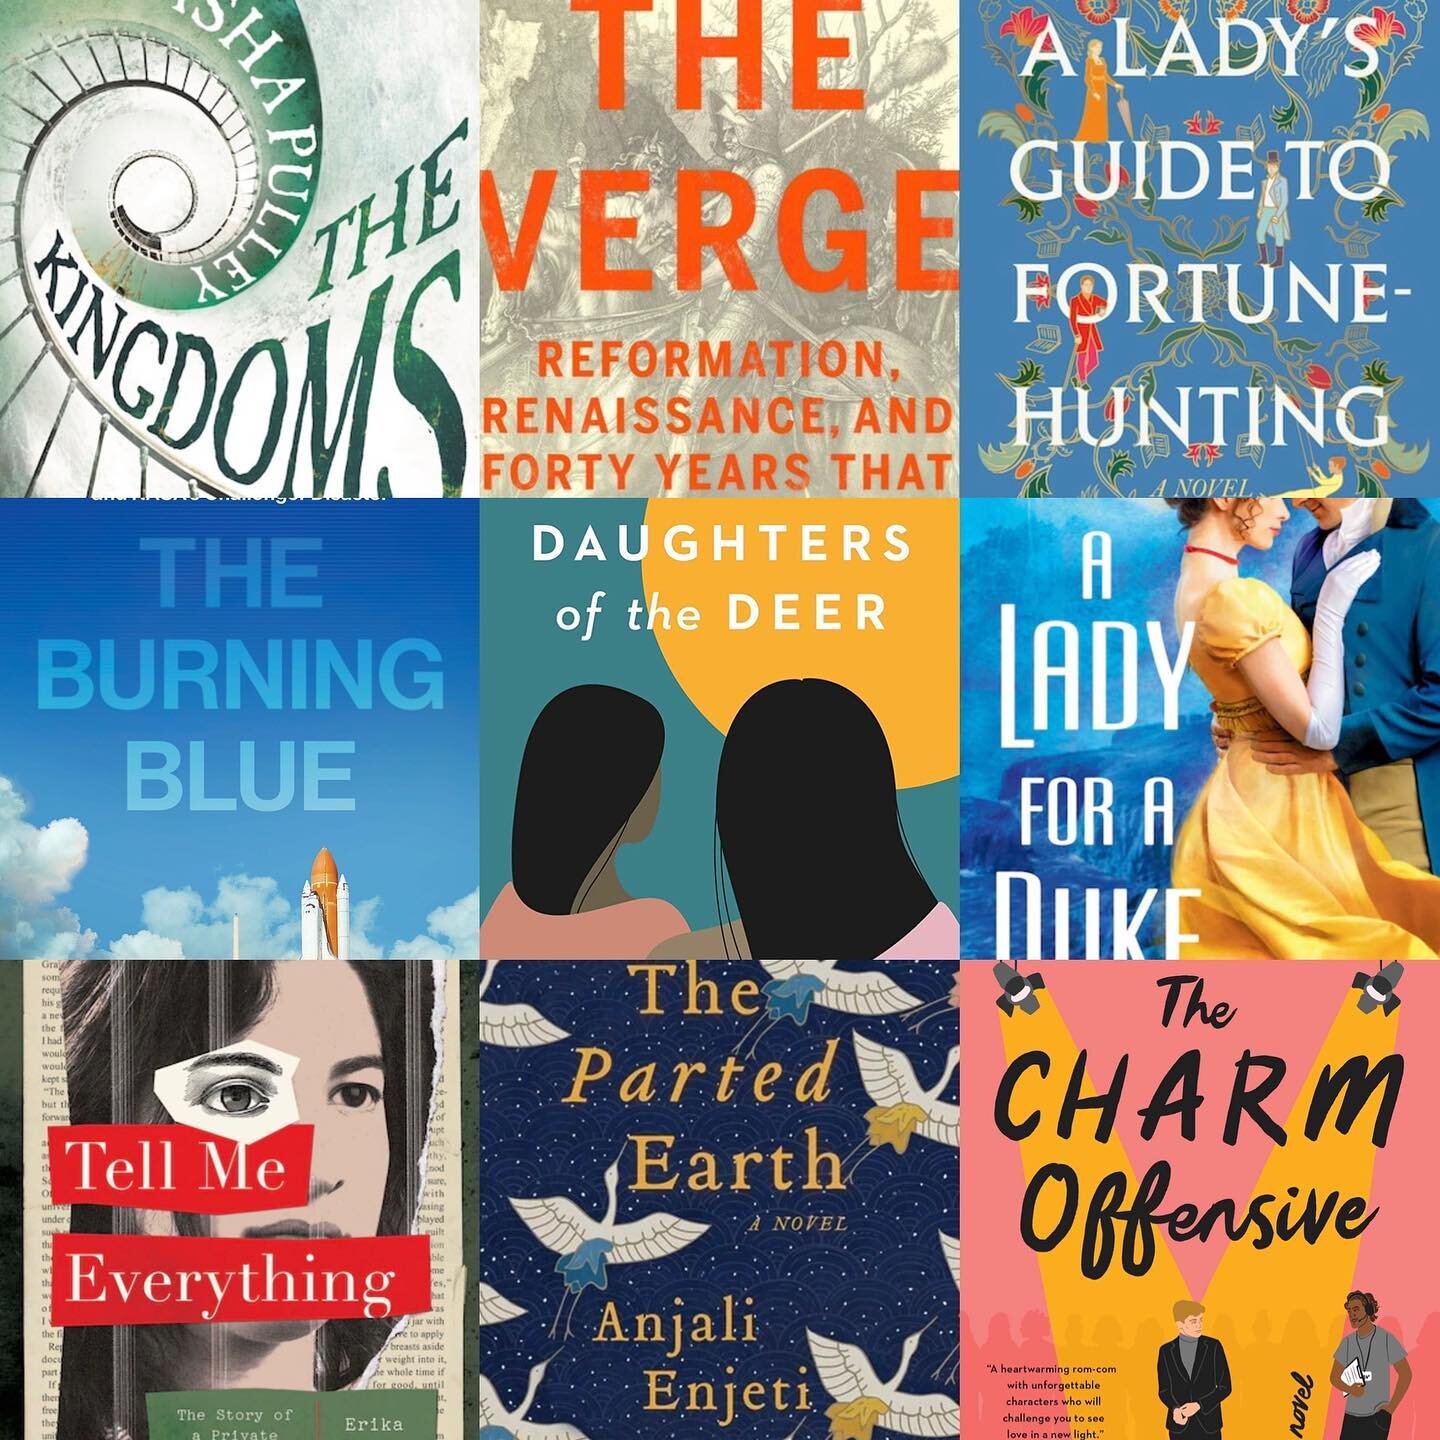 📖I read some excellent books in July/August. Standouts included:
*Daughters of the Deer, a beautiful, devastating novel about colonization, family, gender and so much more
*The Kingdoms, a time bending alternate history
*Tell Me Everything, a stunni